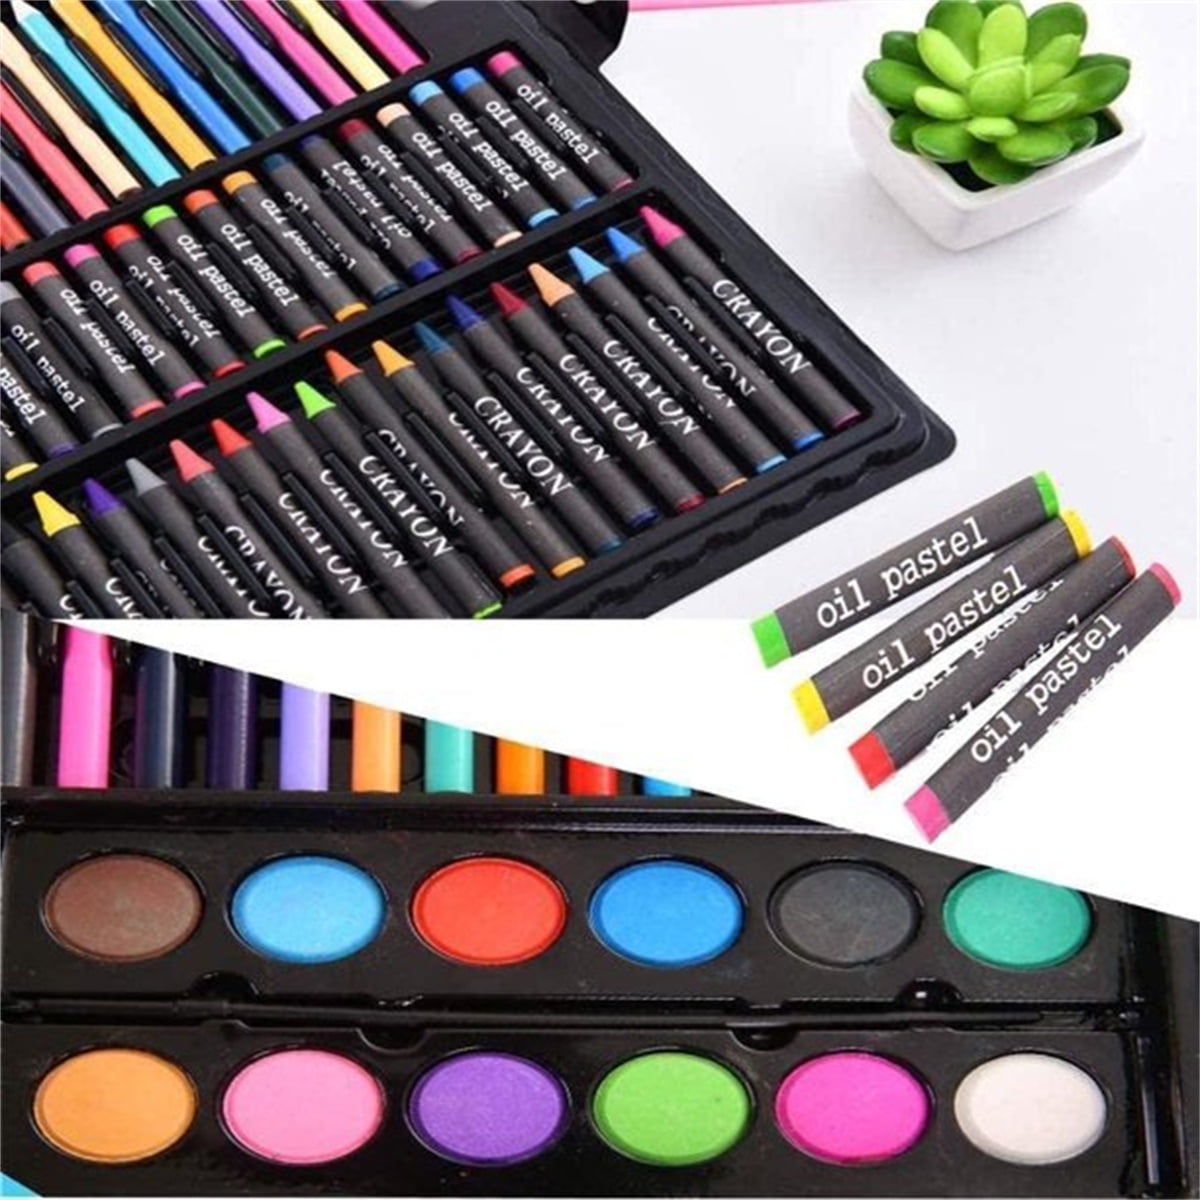 Win £150 worth of art materials with Paint & Draw!